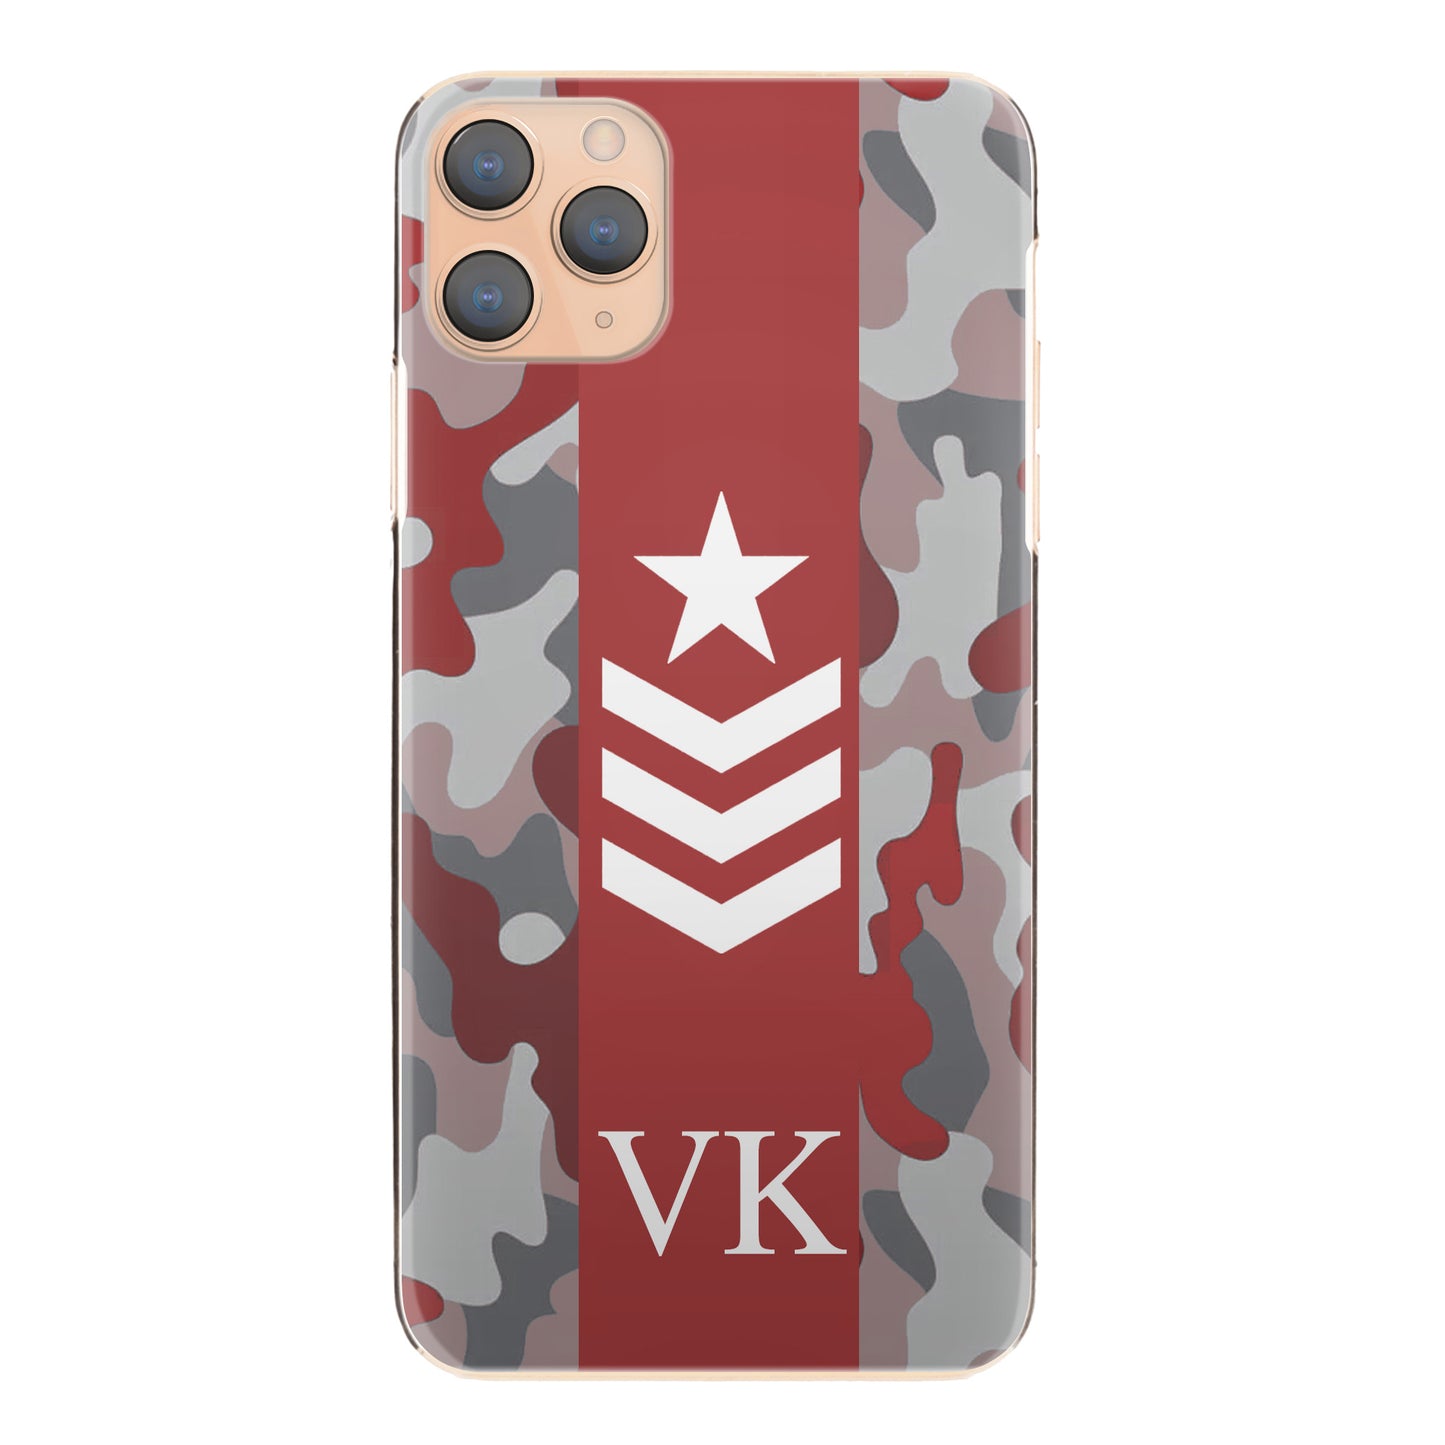 Personalised Google Phone Hard Case with Initials and Army Rank on Red Camo